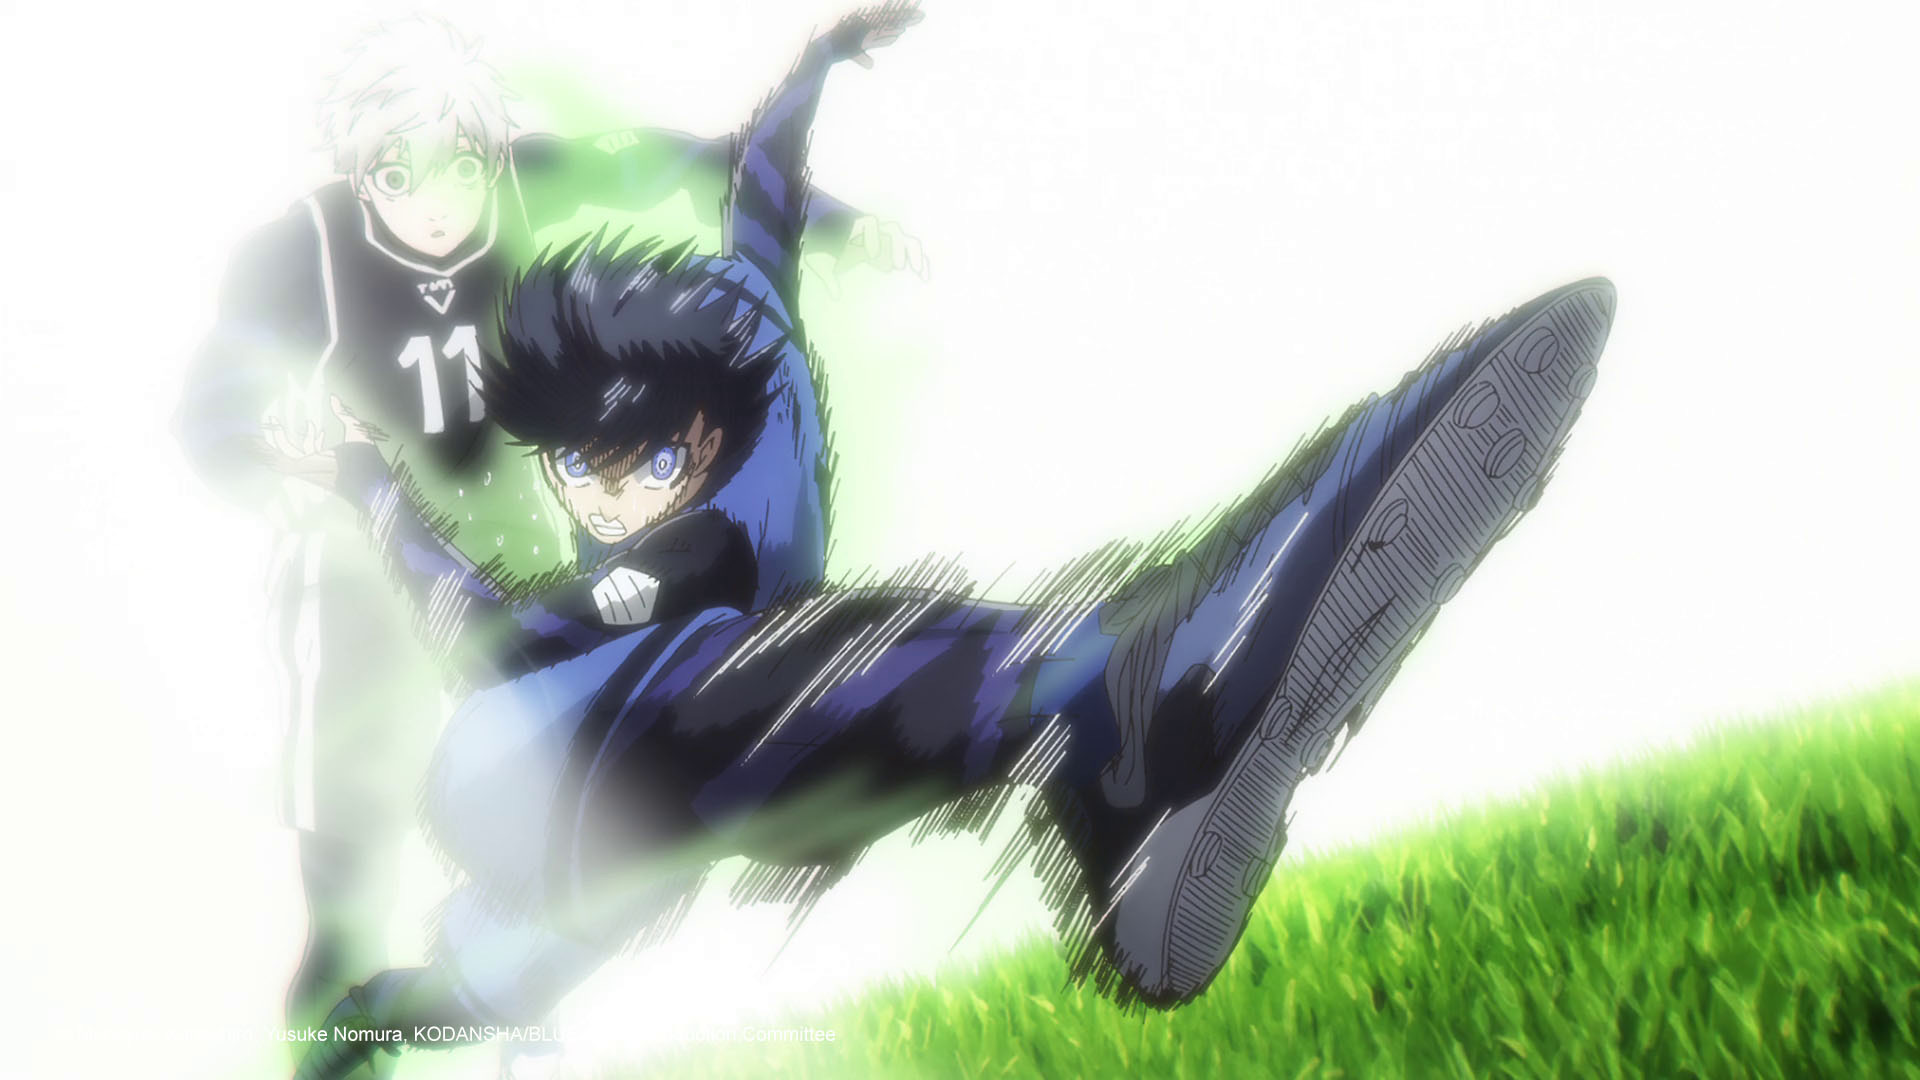 AnimeTV チェーン on X: There are only 5 more episodes of BLUELOCK left! What's  your favorite moment so far? ⚽️🔥 ✨More:    / X